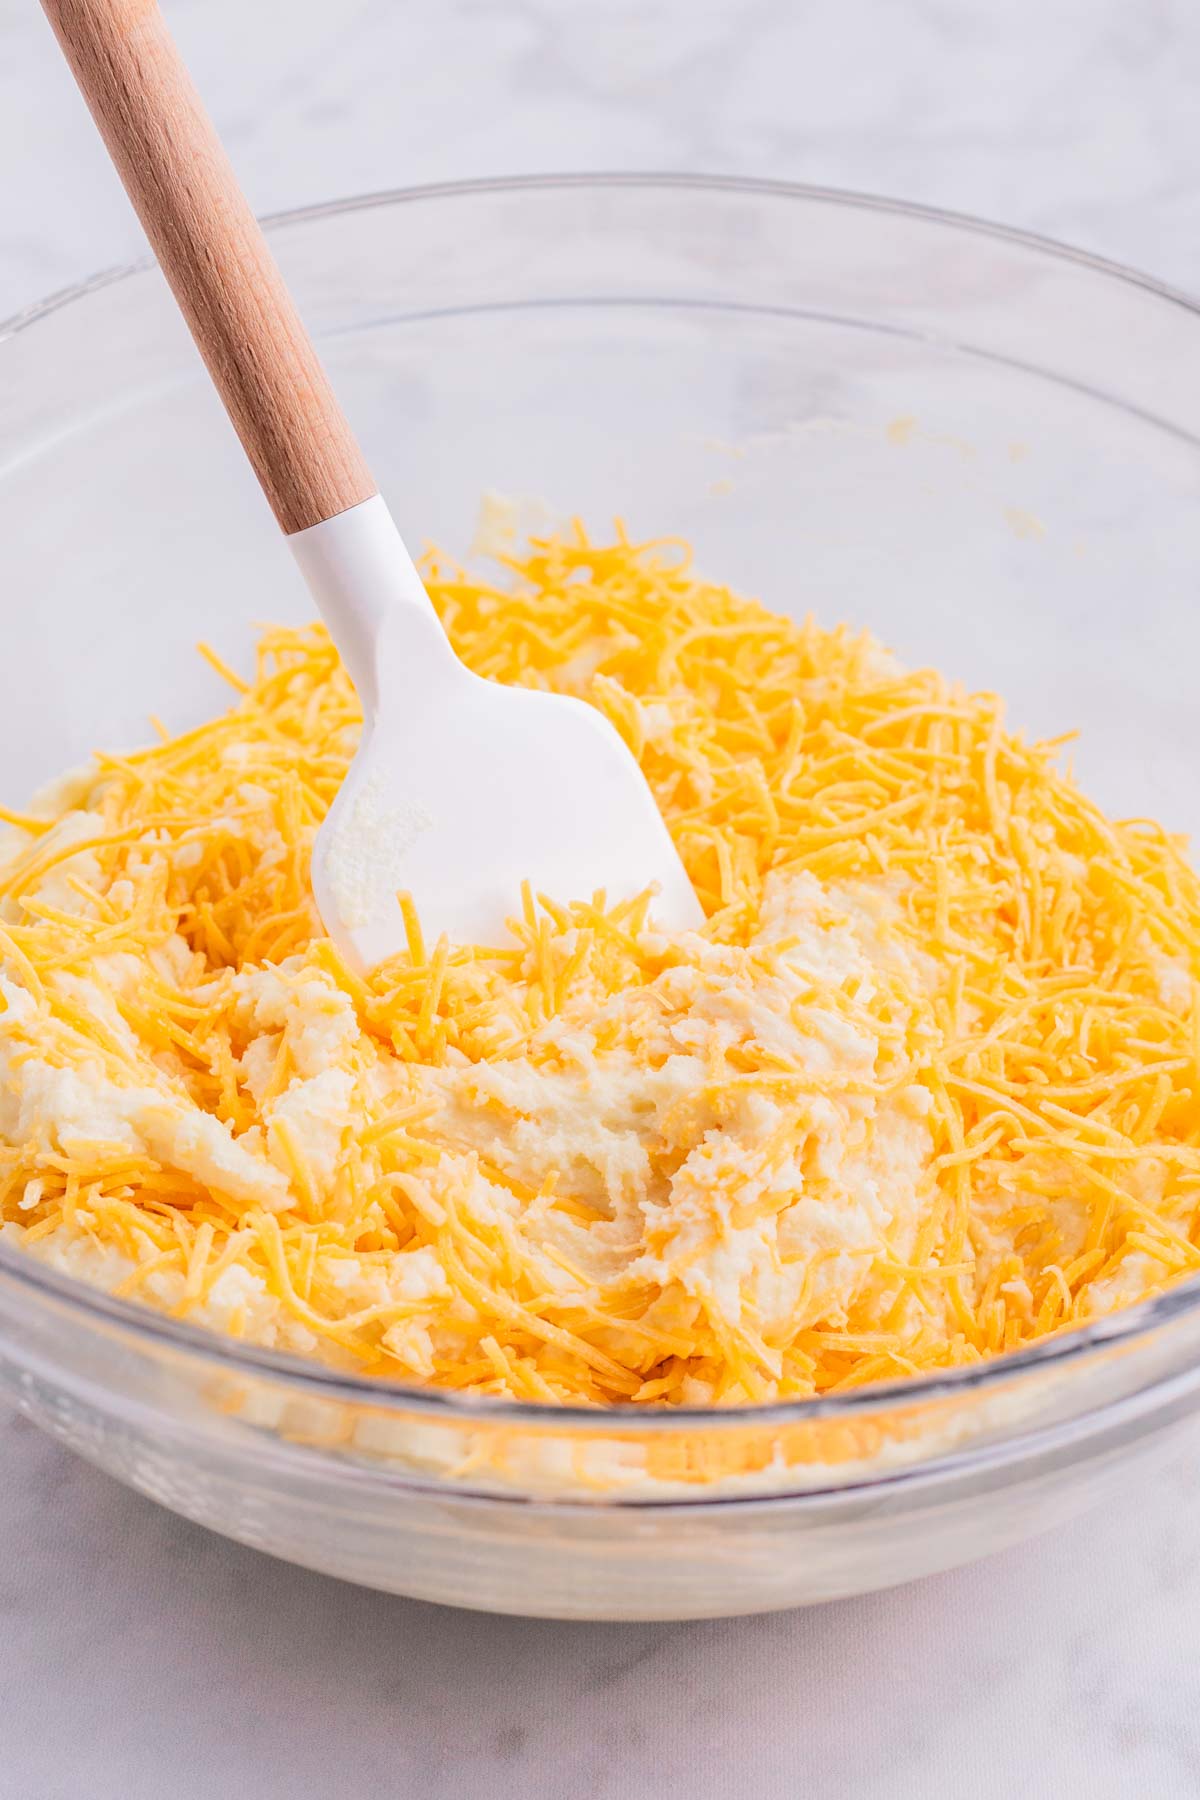 Cheese is stirred into the batter.